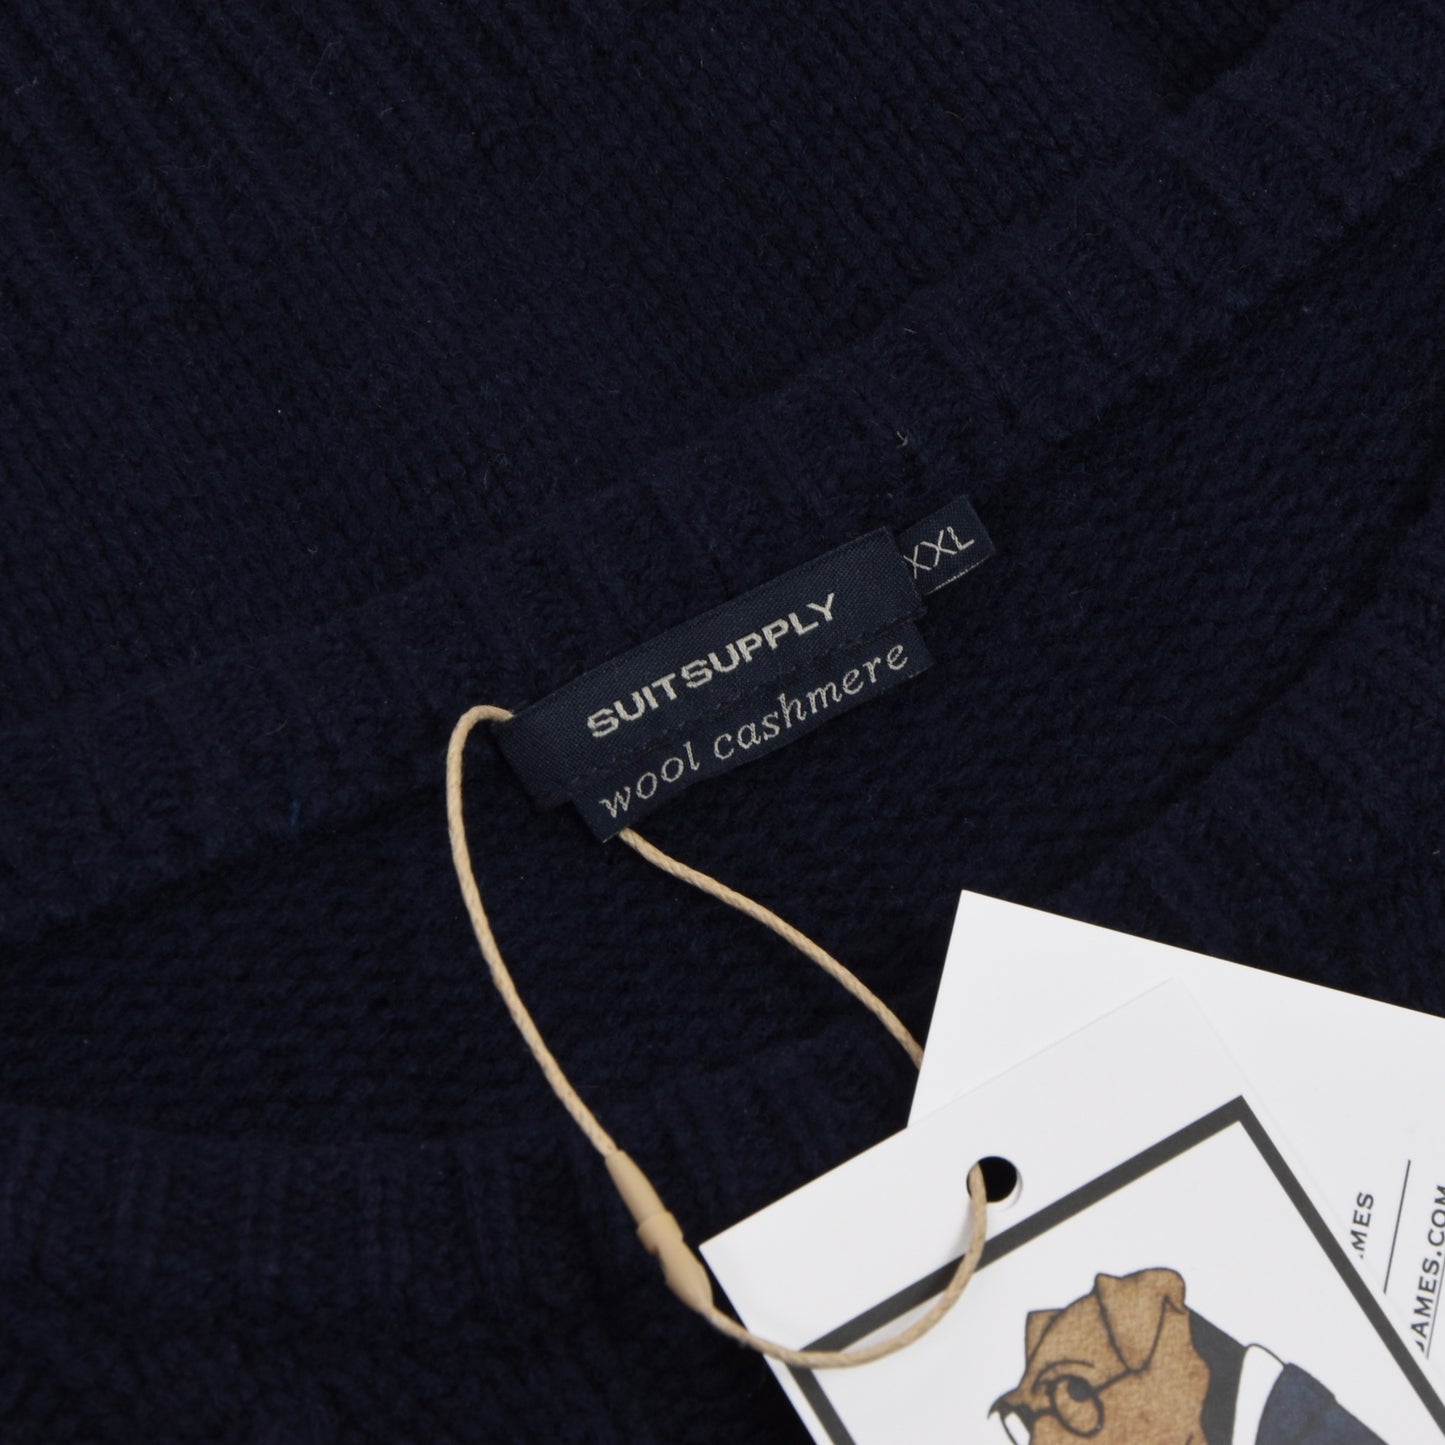 Suitsupply Wool/Cashmere Cableknit Sweater Size XXL - Navy Blue